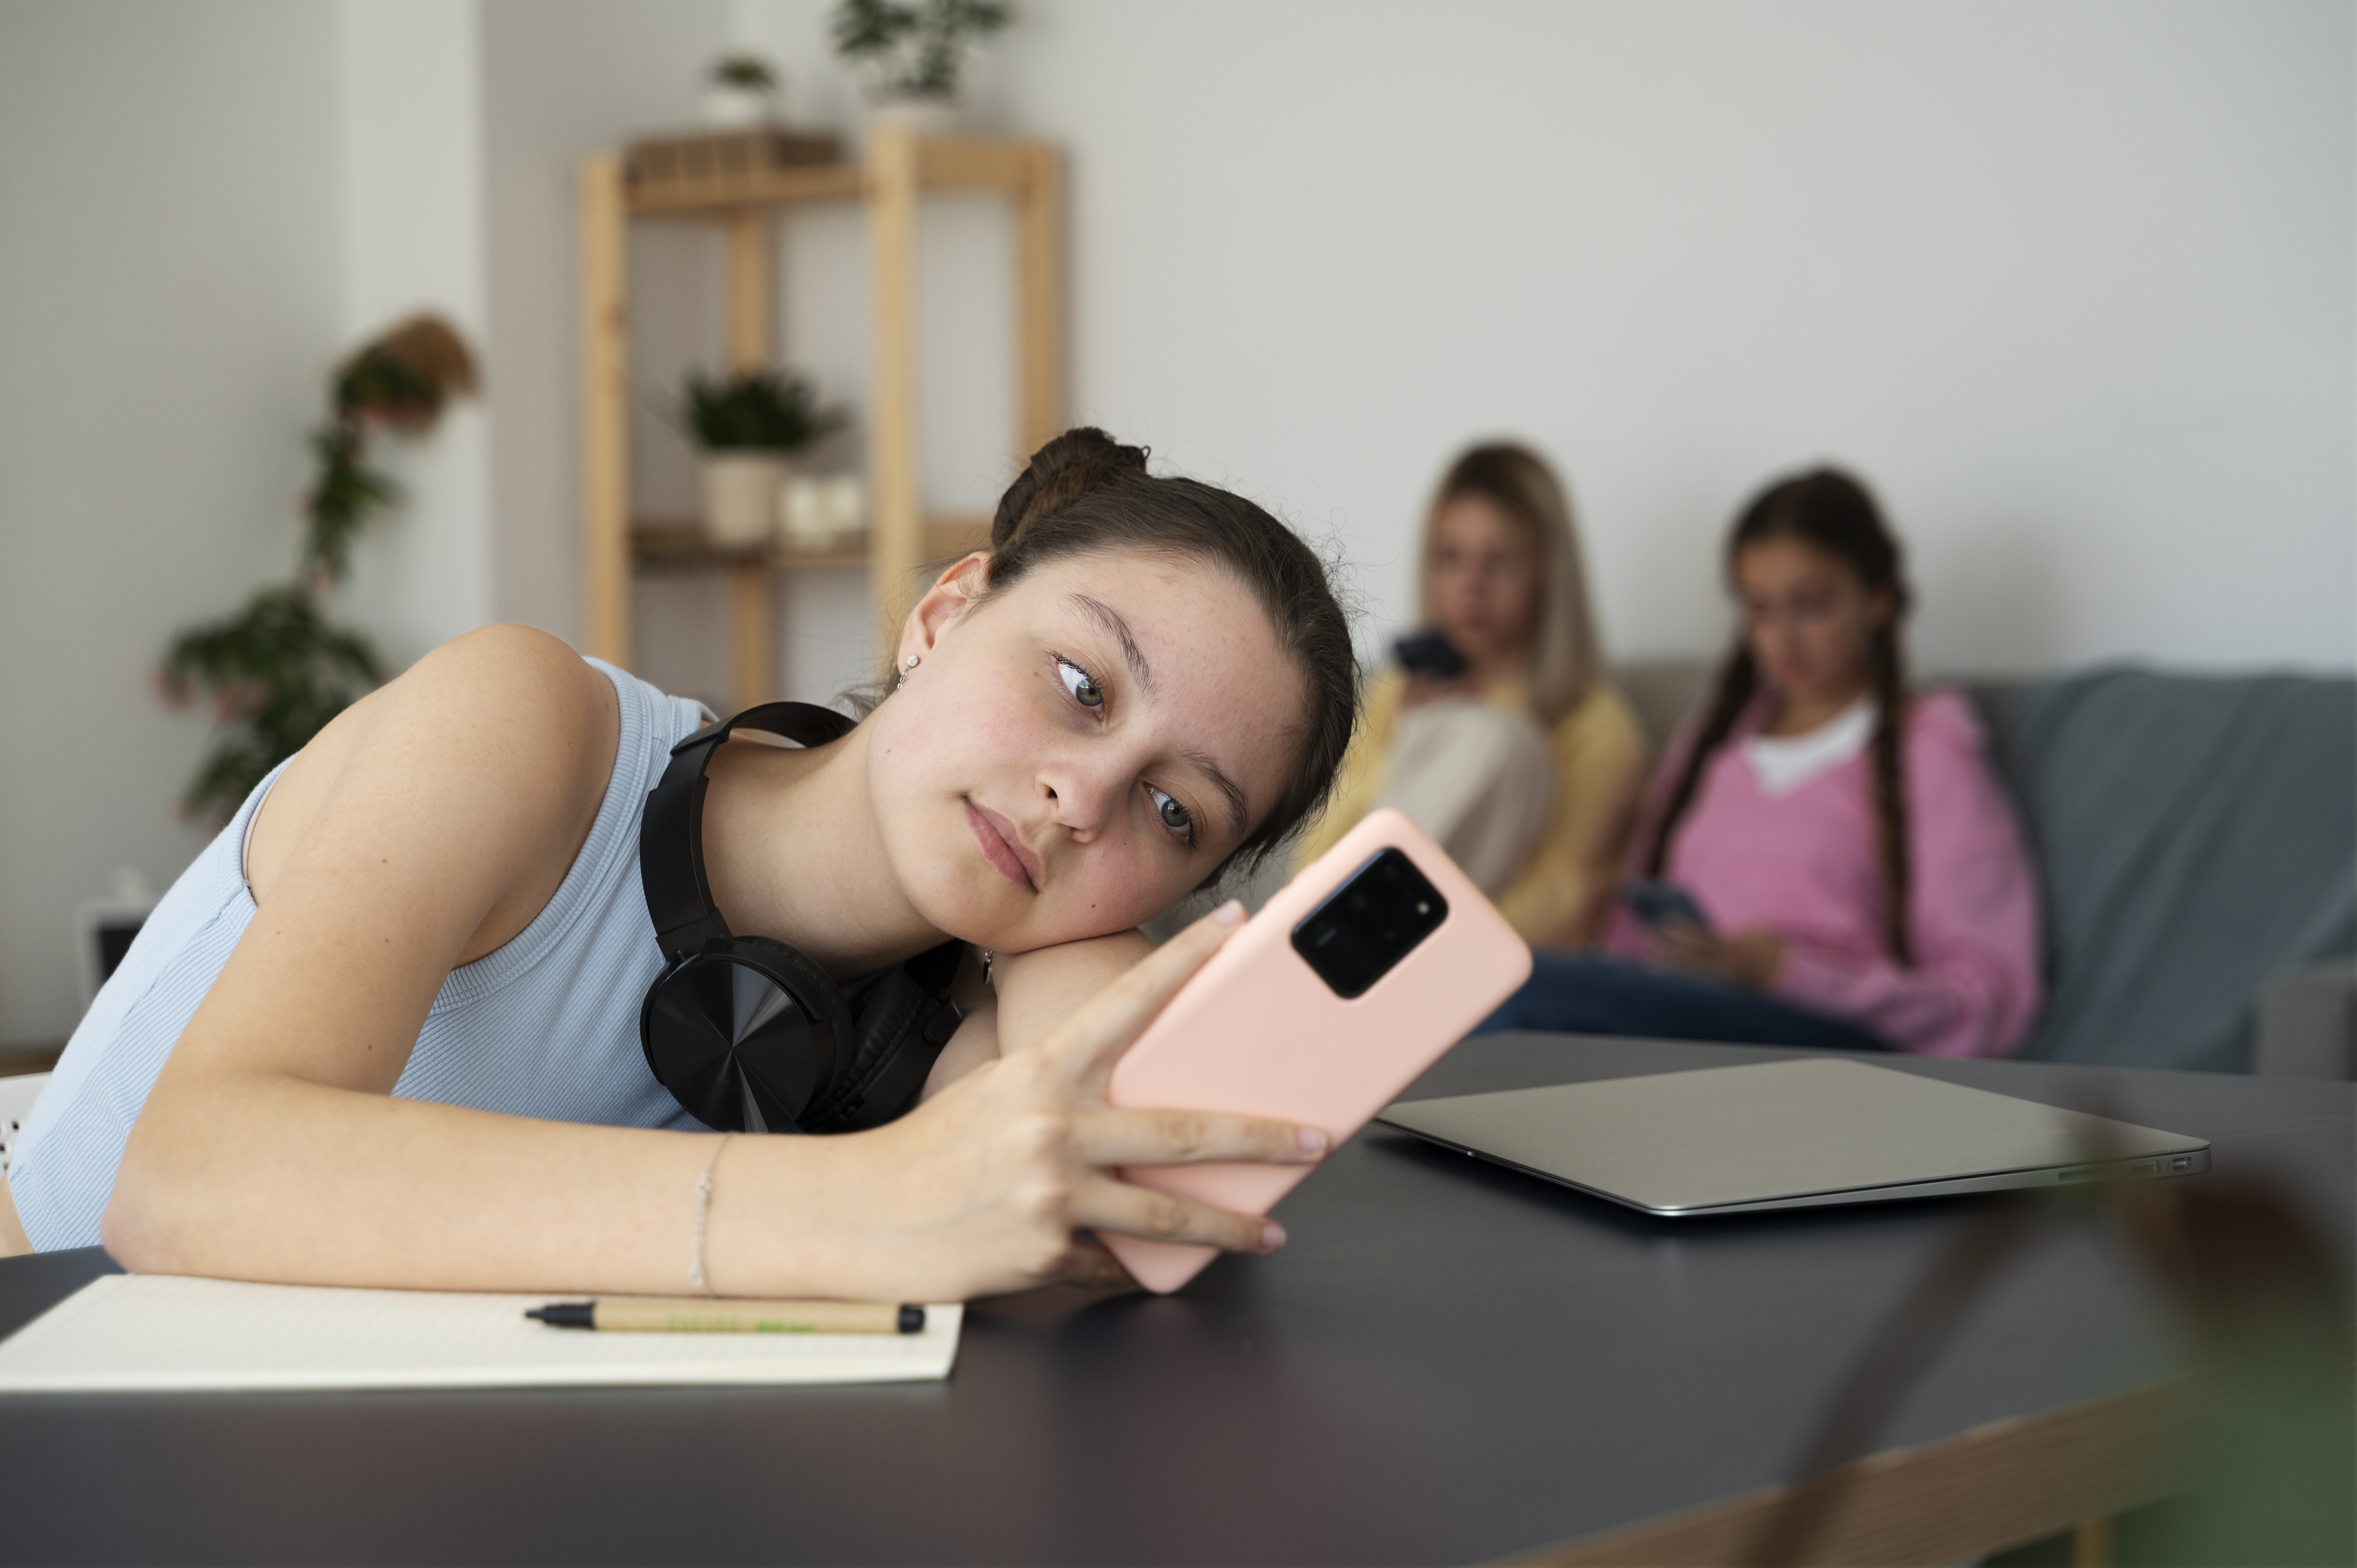 A female freshman turns on her phone settings to grayscale before a study session